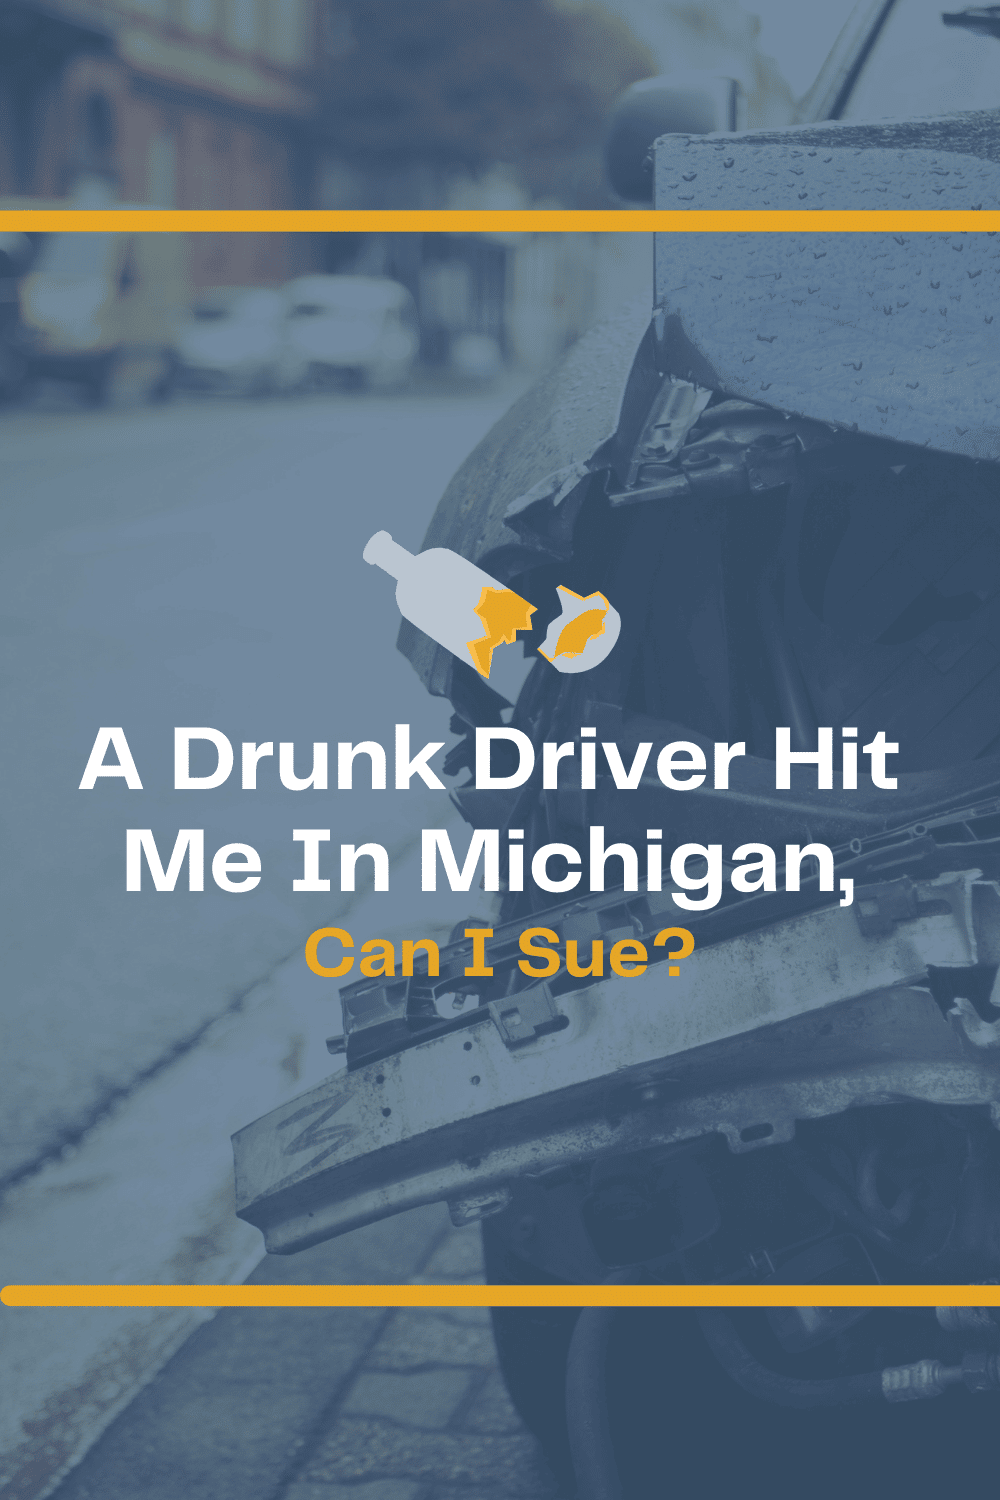 Hit By A Drunk Driver in Michigan, Can I Sue?